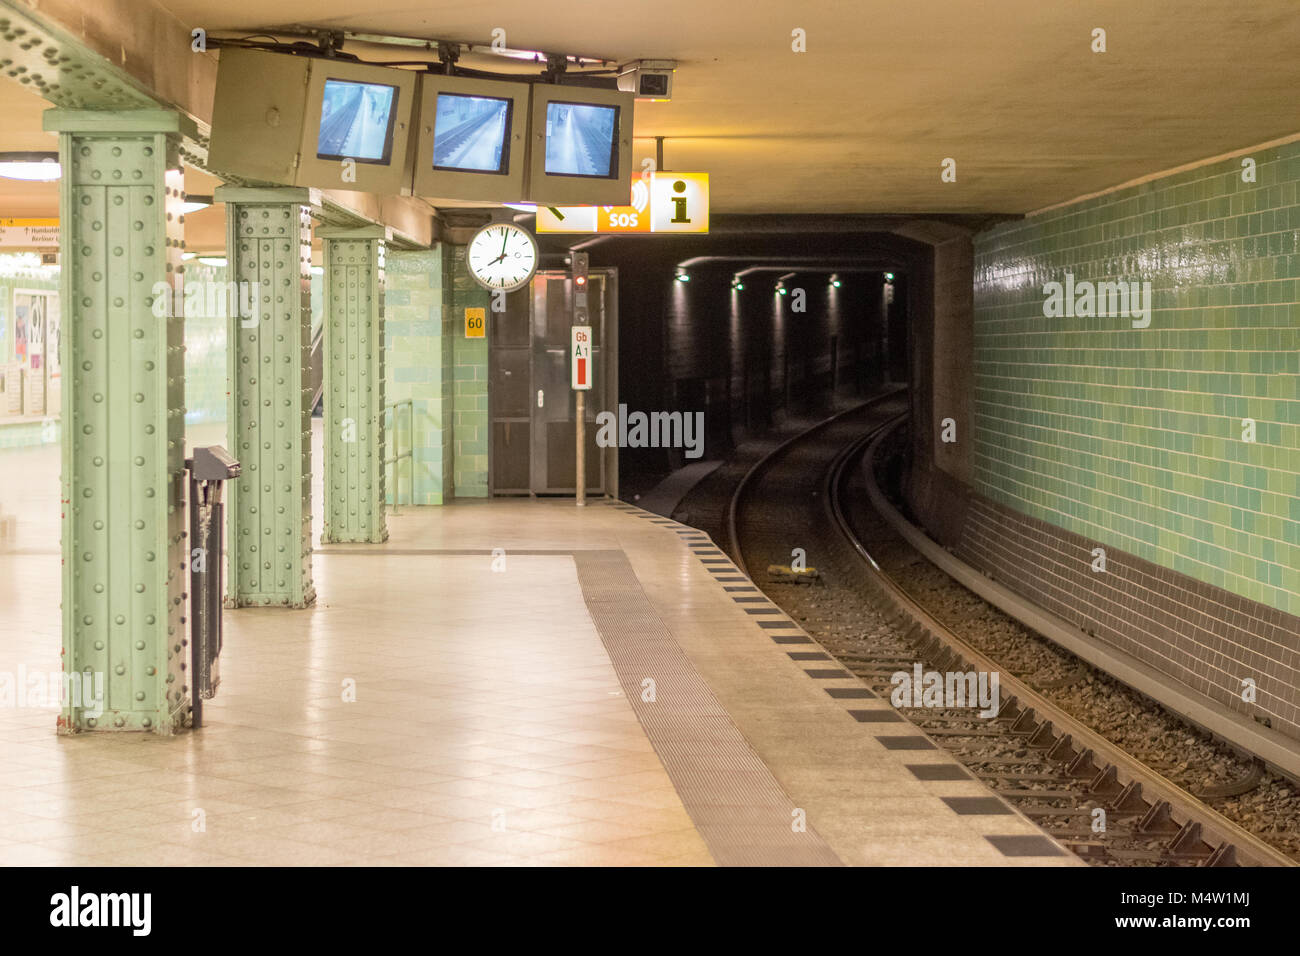 Security and surveillance cameras and monitors in Metro. Stock Photo